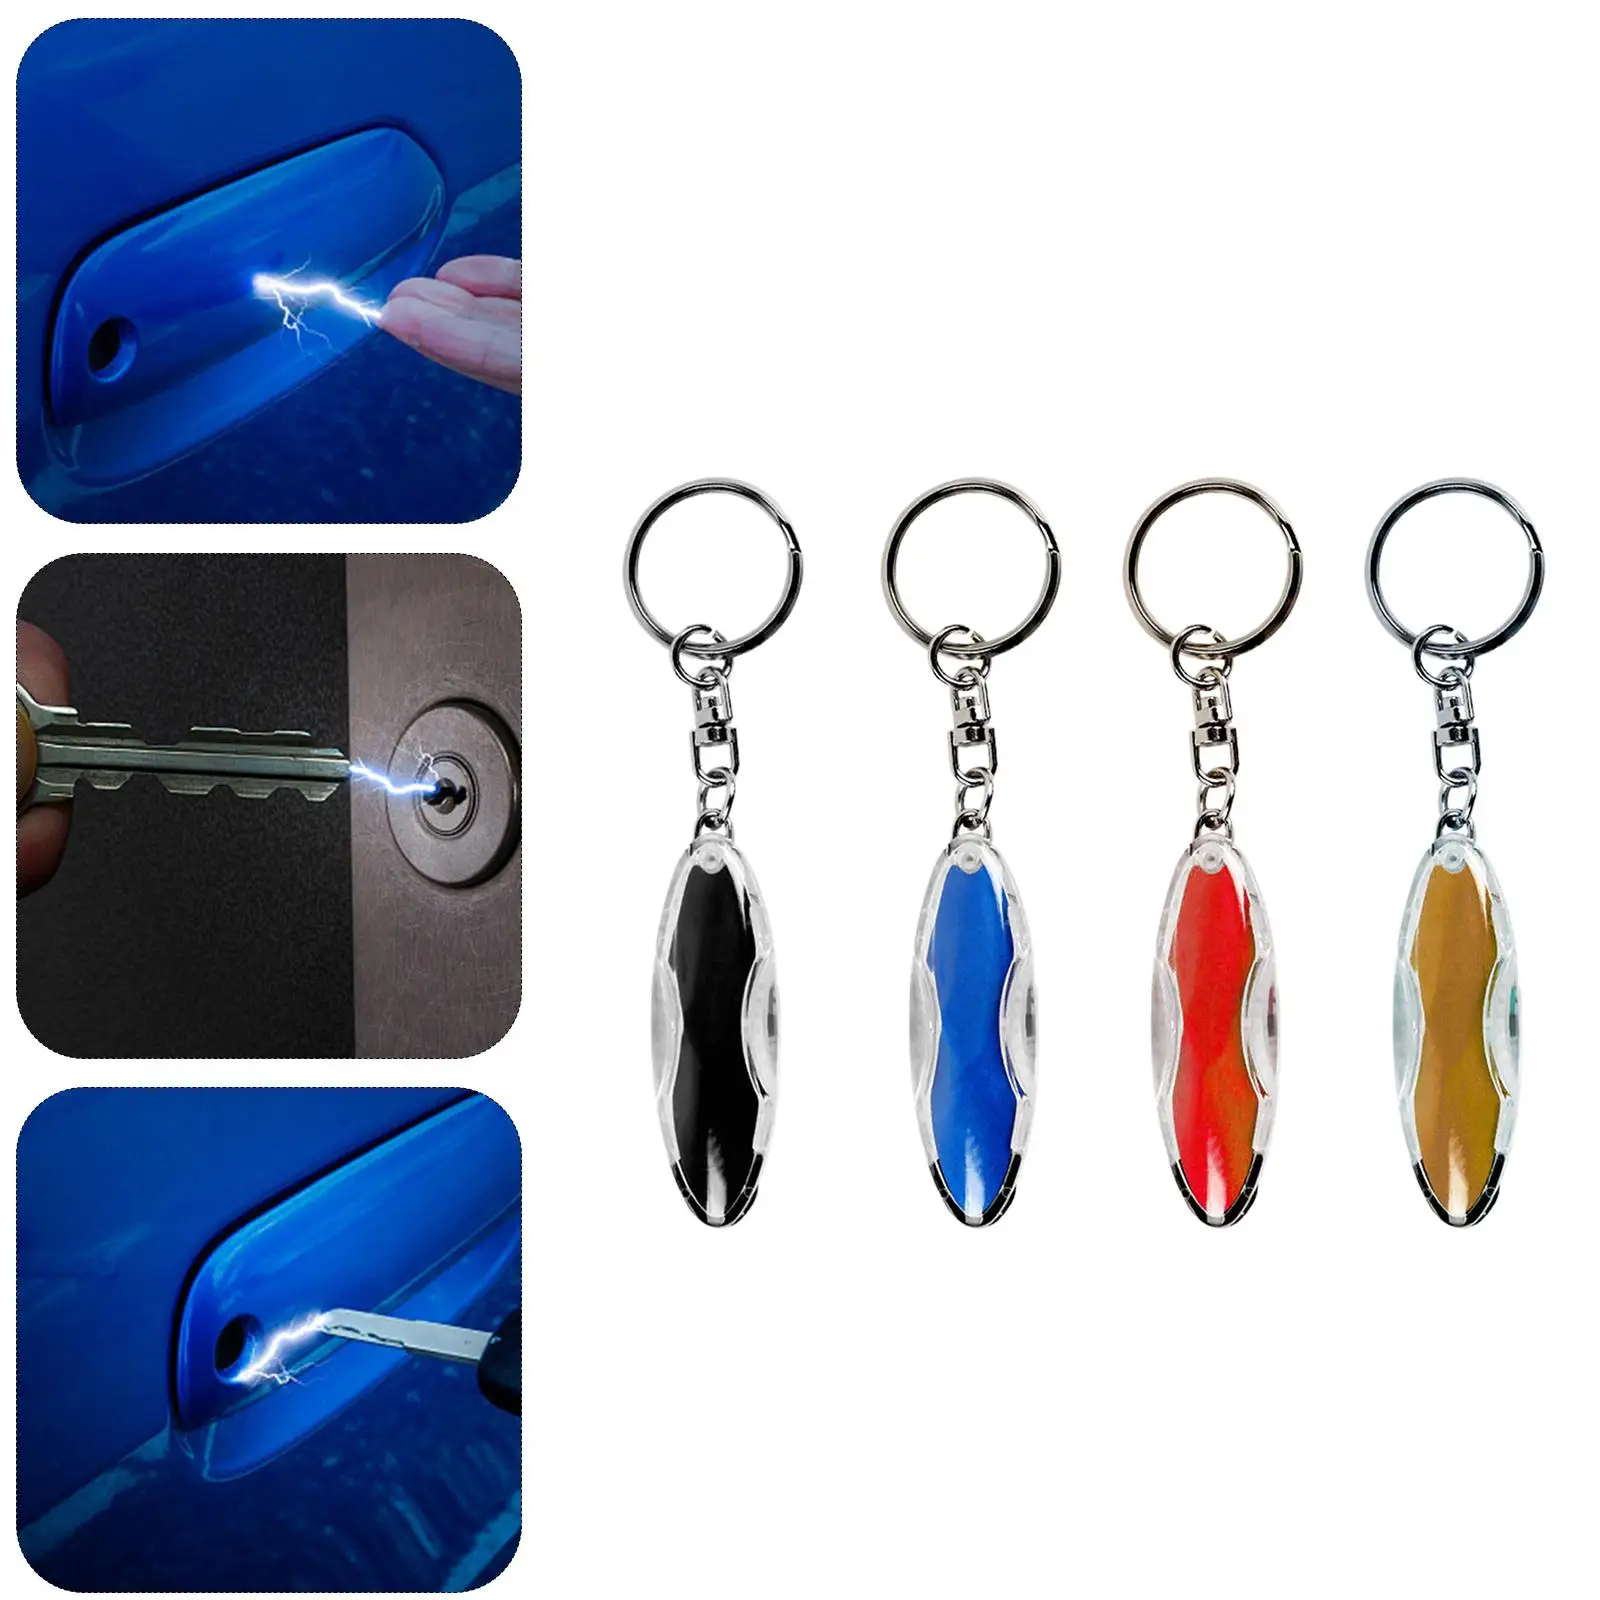 Car Anti Static Keychain, Human Body Car Static Interior Accessory Gifts Practical for Rear View Mirror Vehicle